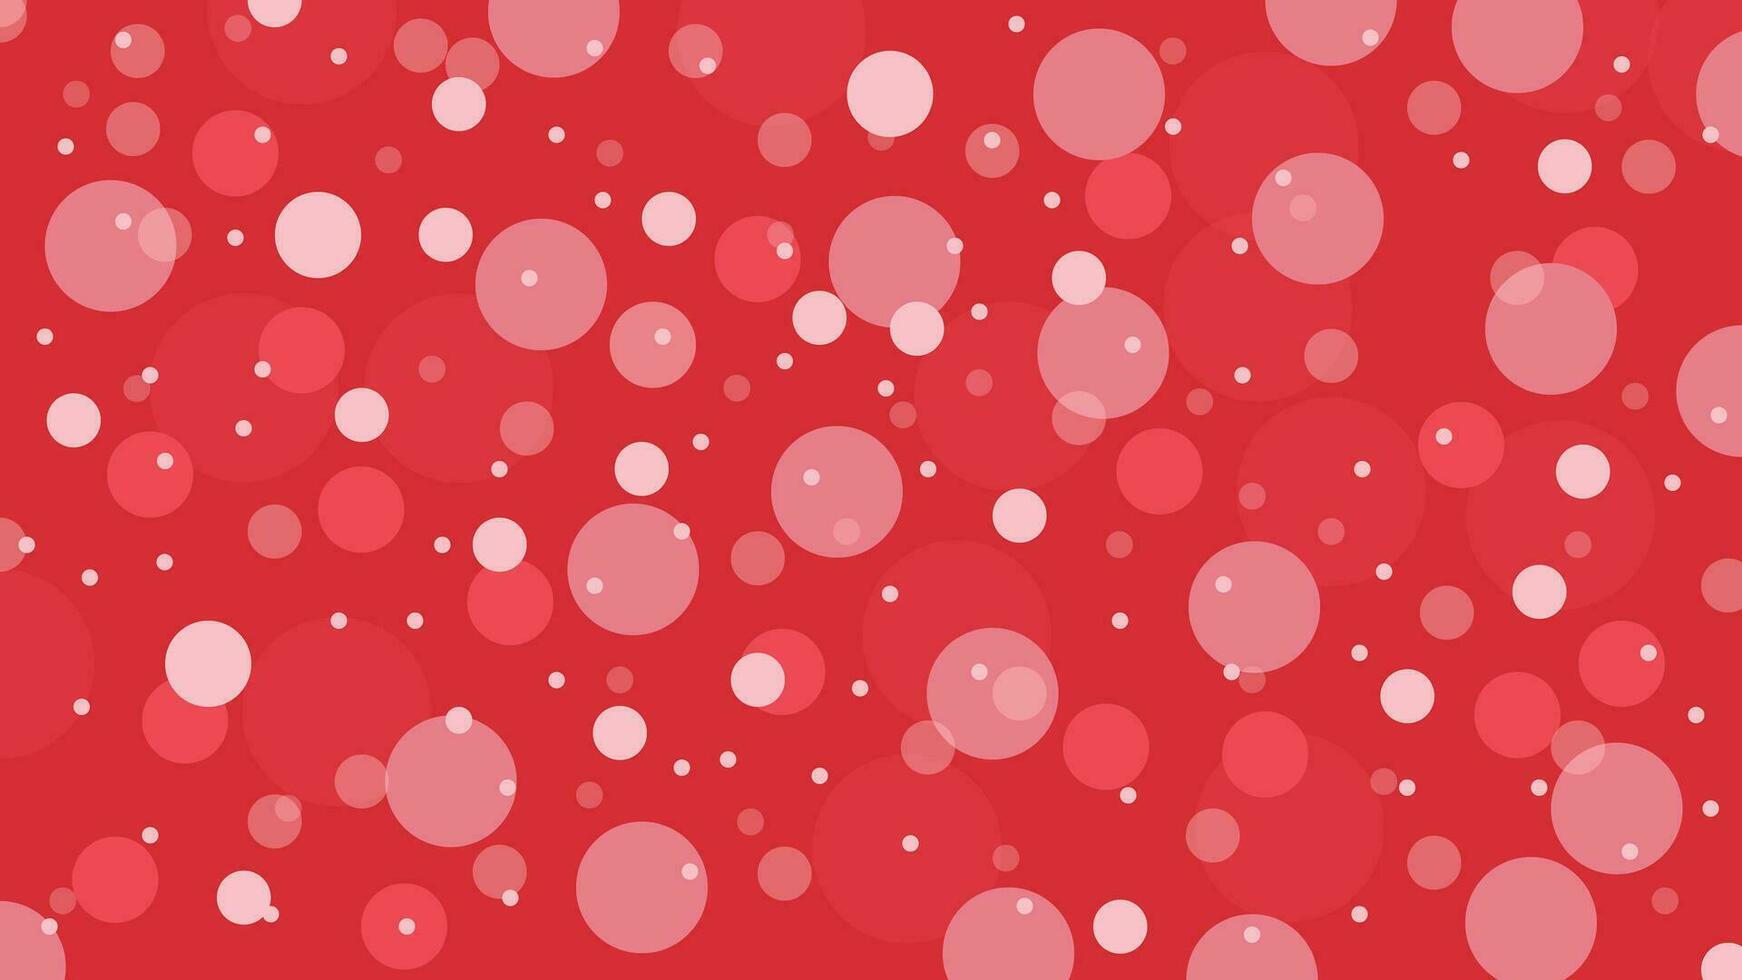 abstract Kerstmis bubbel rood achtergrond vector